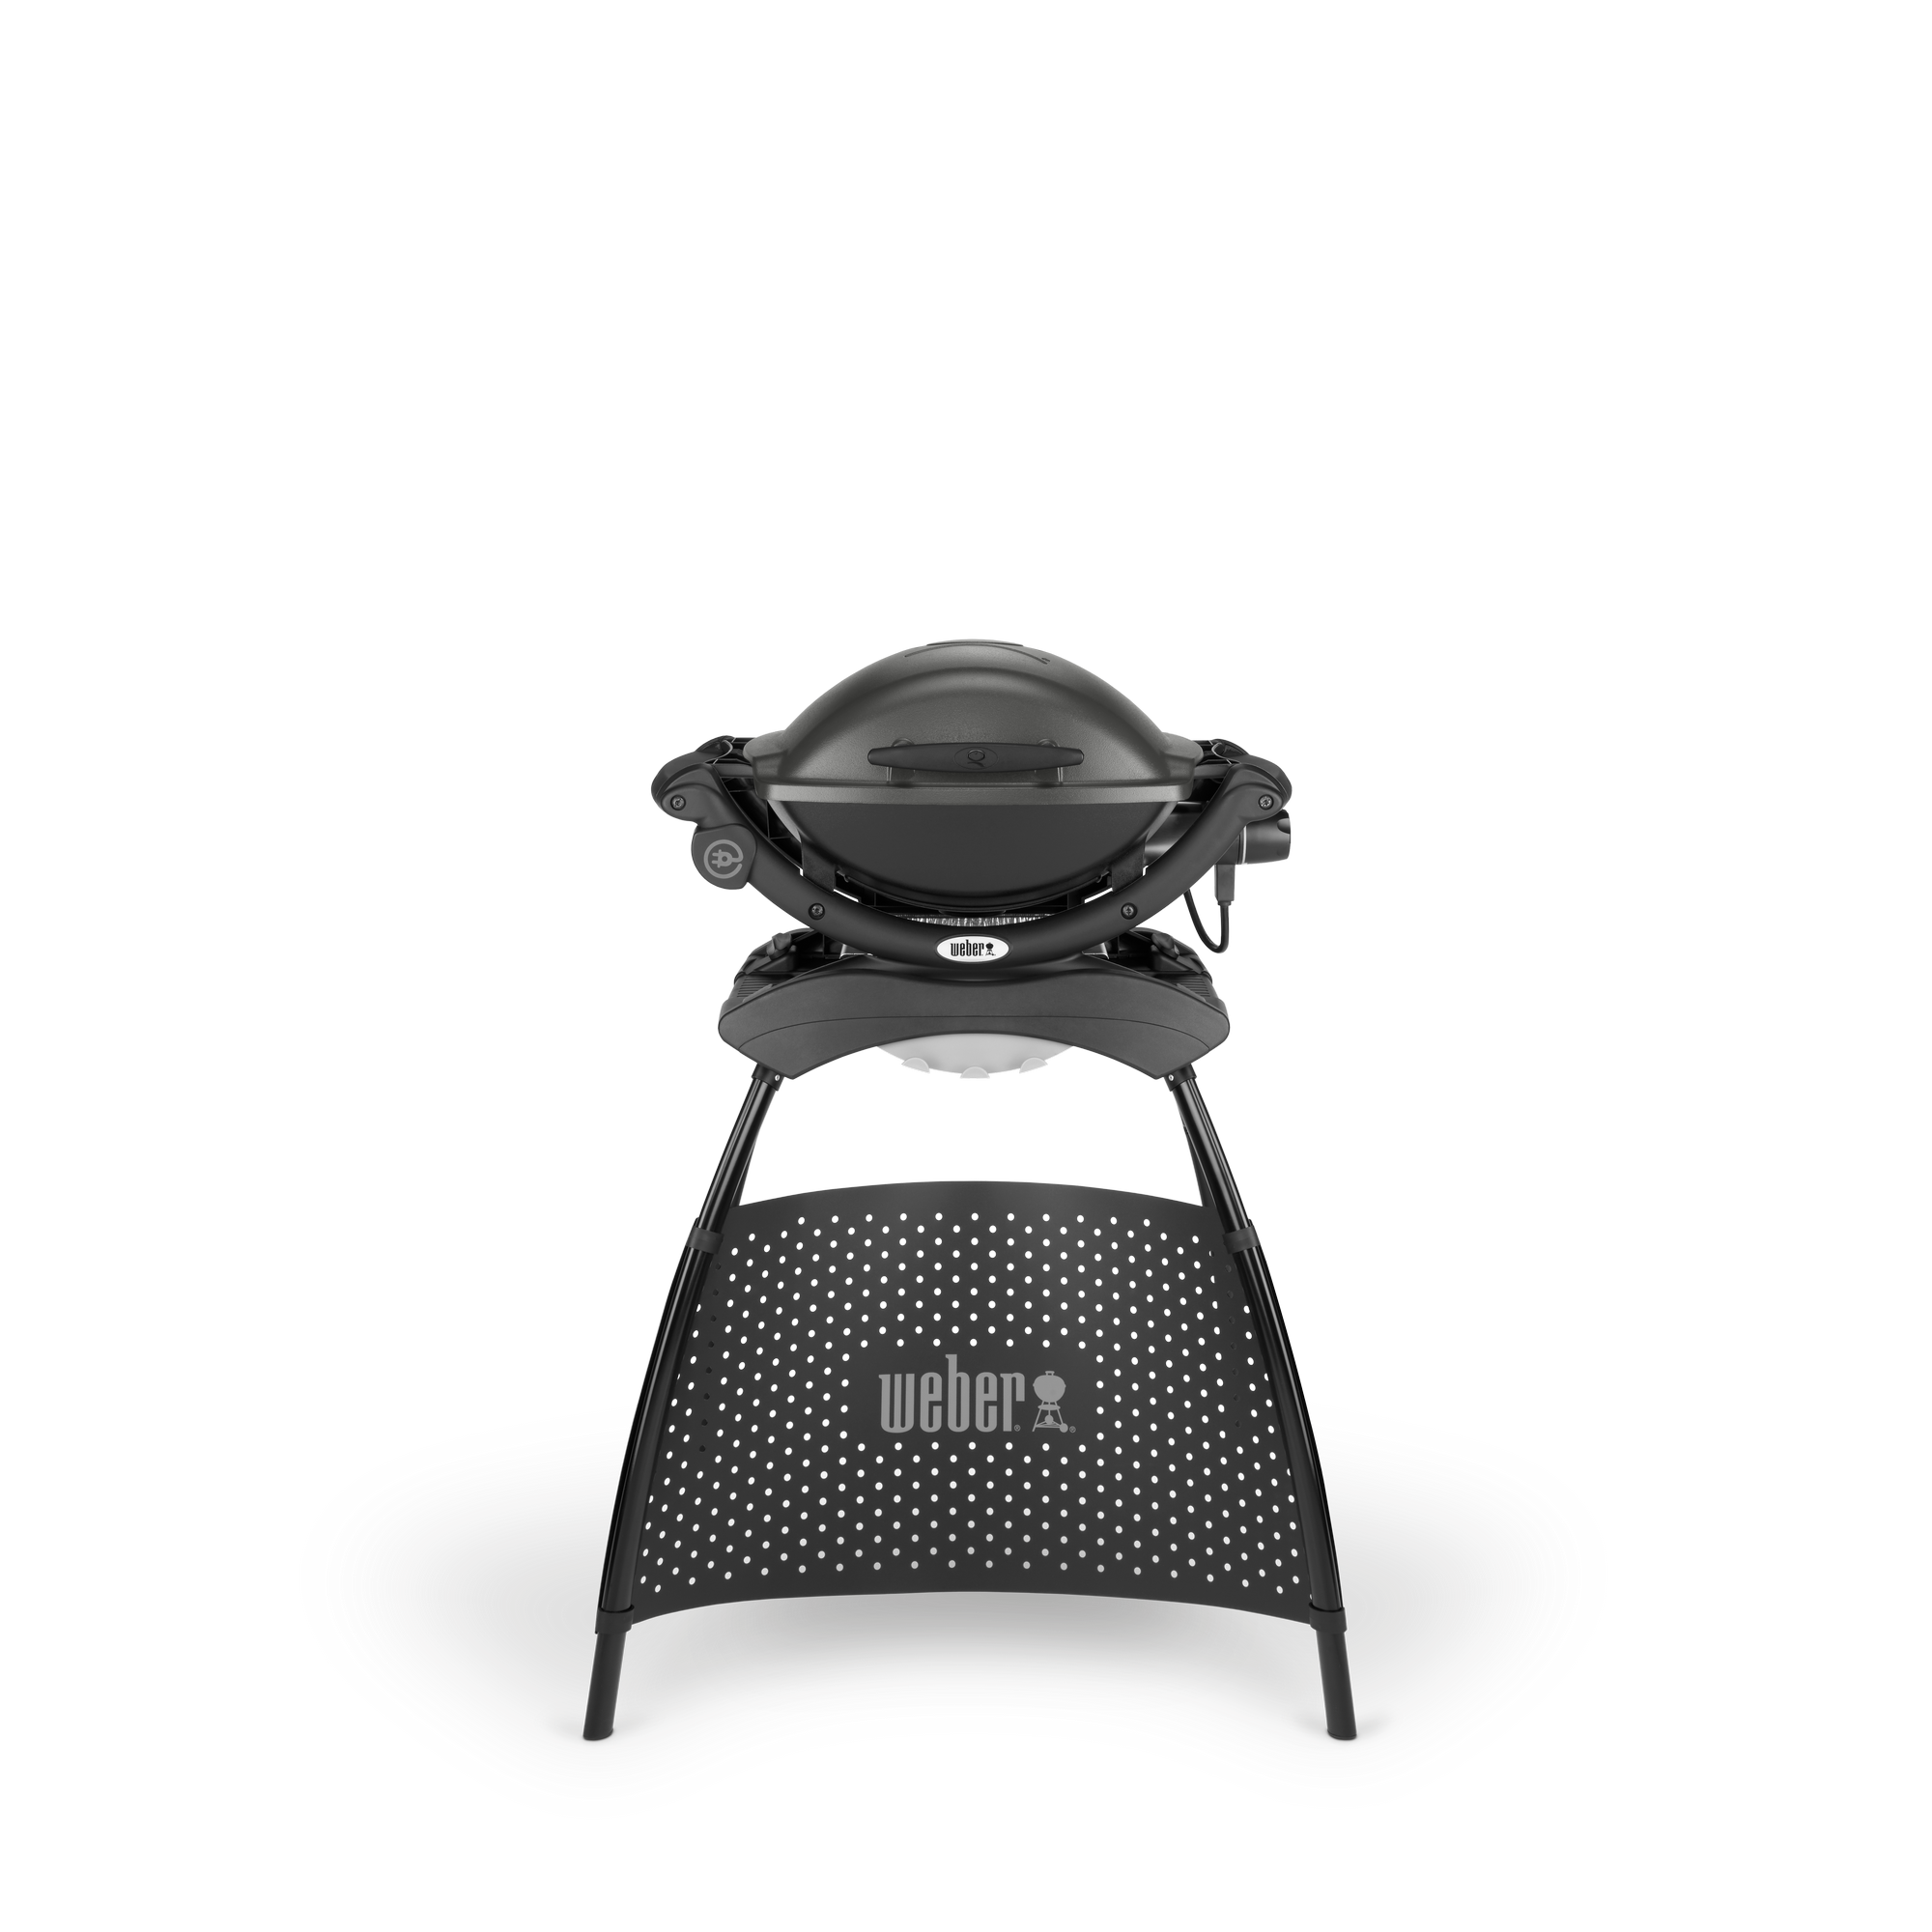 Elektrogrill 'Weber® Q 1400' mit Stand dunkelgrau + product picture